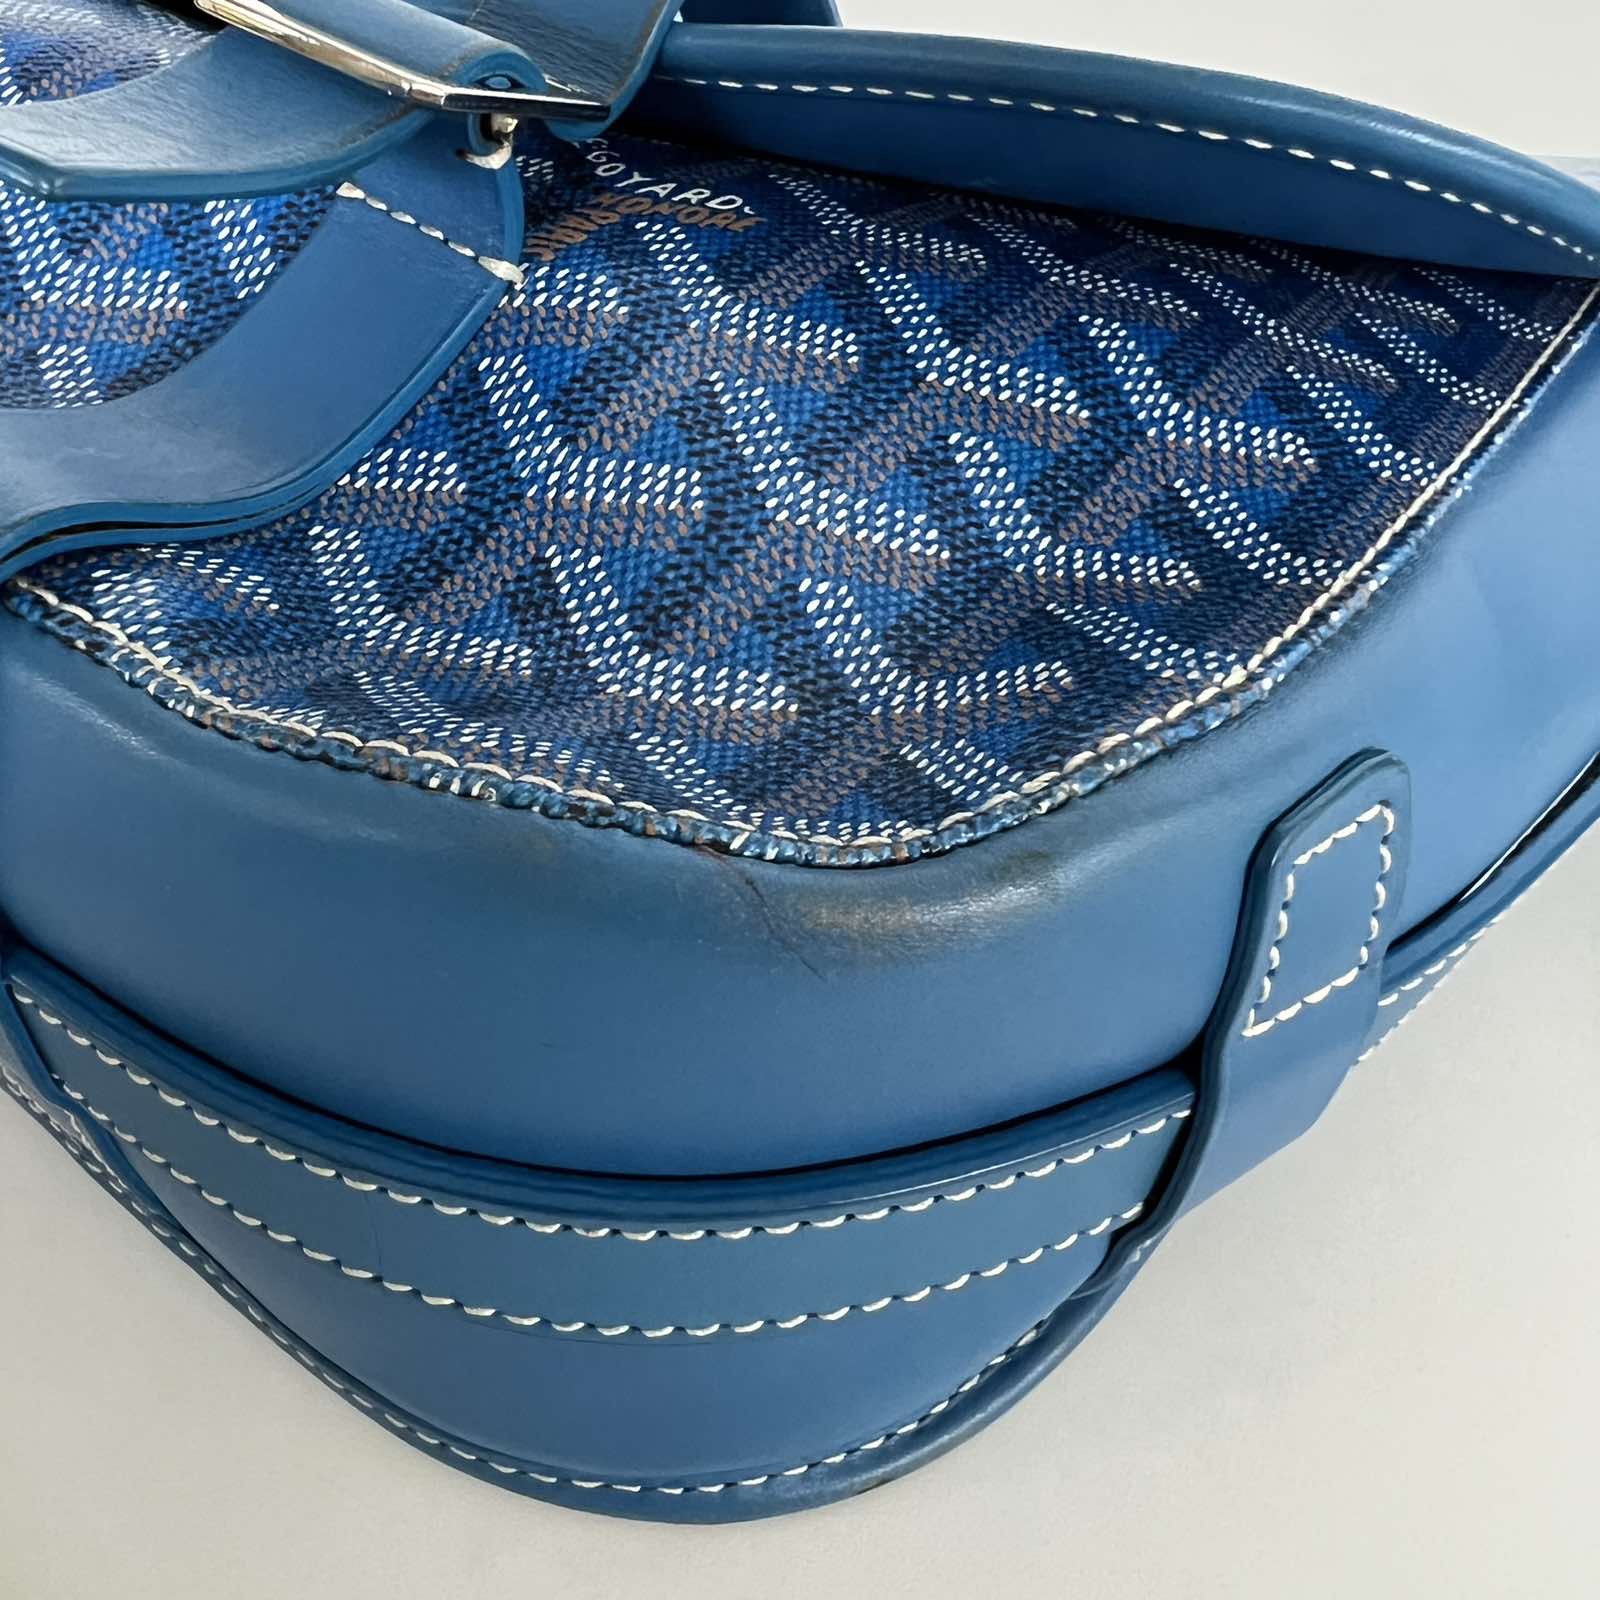 SOLD/LAYAWAY💕 Goyard Blue Goyardine Coated Canvas Messenger Bag Silver  Hardware. Made in France. With certificate of authenticity from ENTRUPY ❤️  - Canon E-Bags Prime